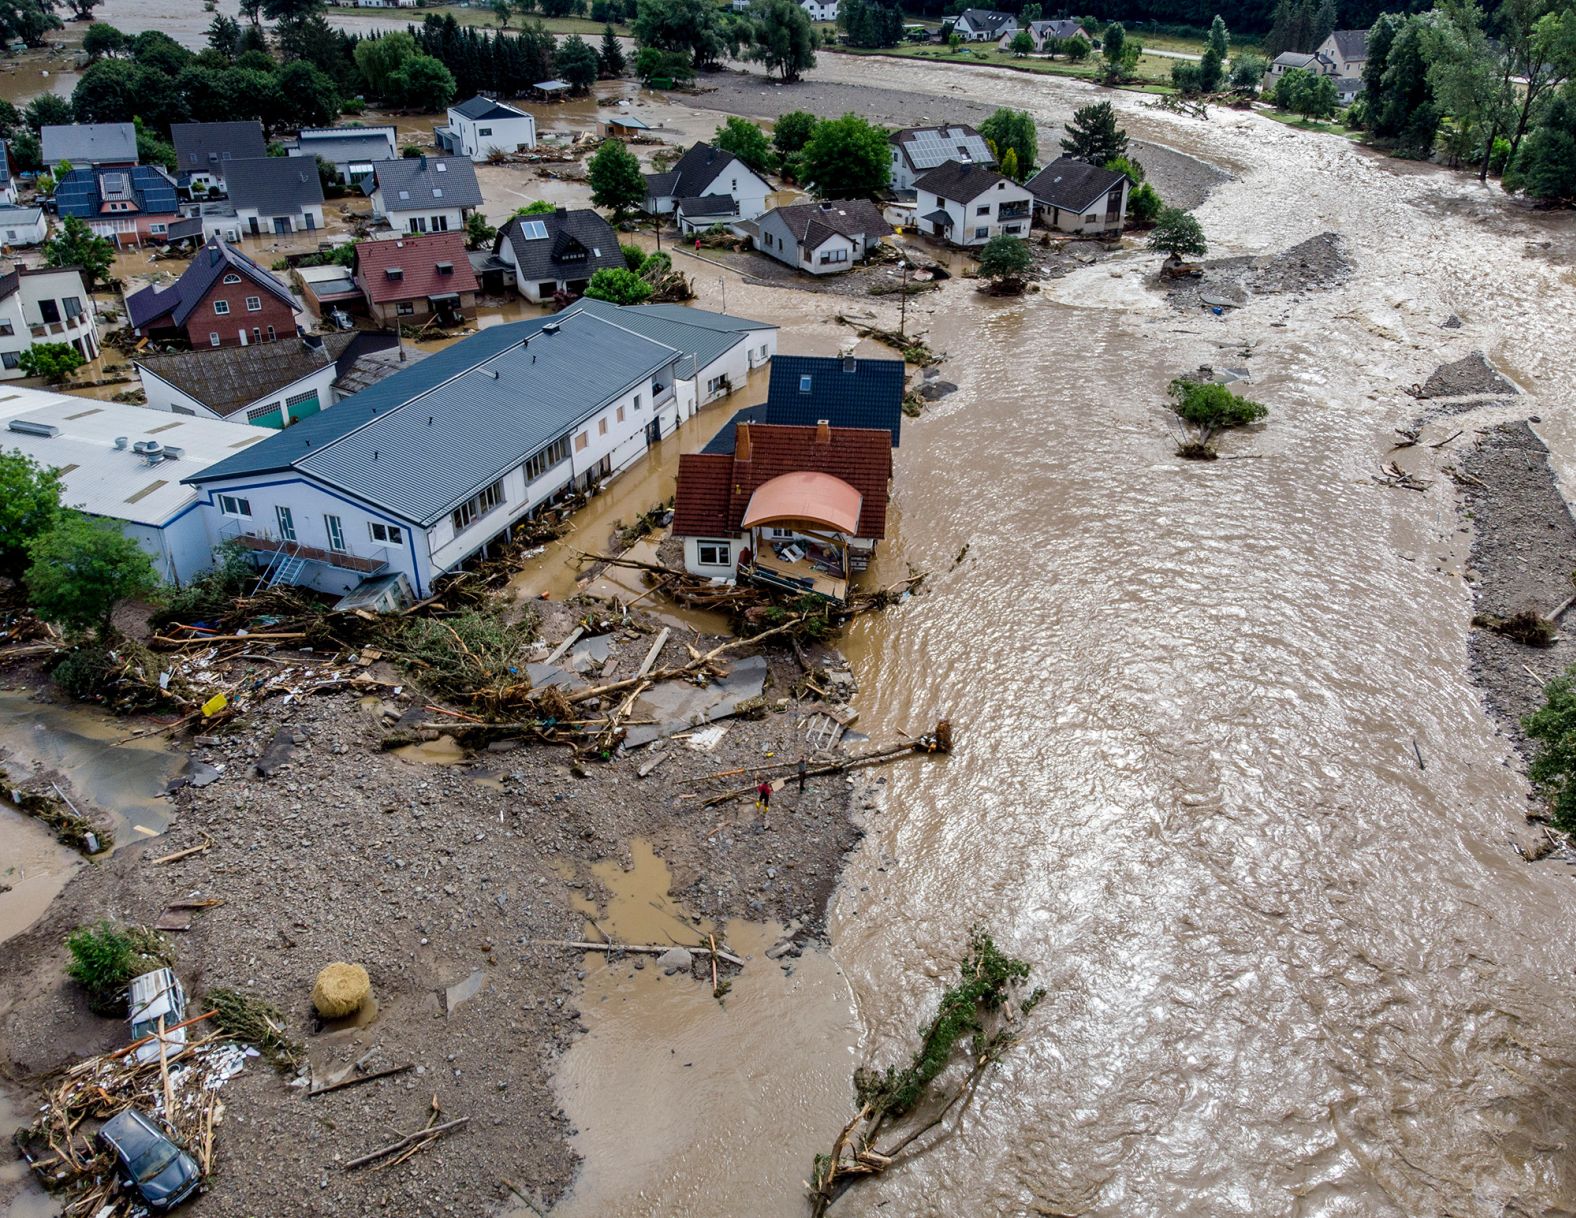 Houses are damaged by flooding in Insul, Germany, on Thursday.